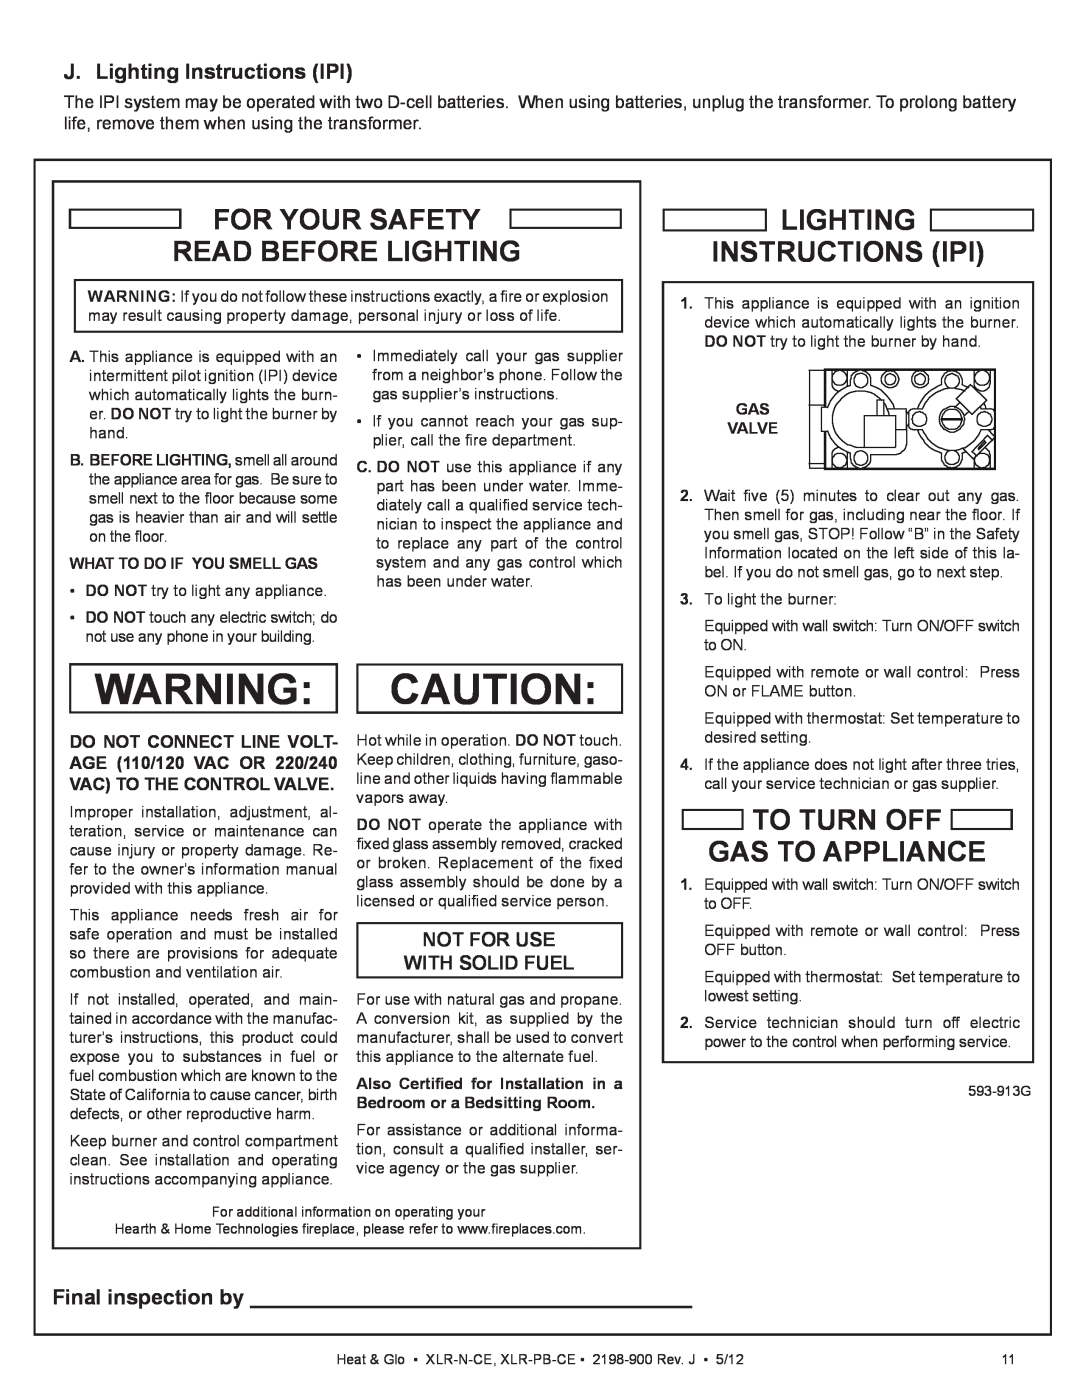 Heat & Glo LifeStyle XLR-PB-CE J. Lighting Instructions IPI, Final inspection by, For Your Safety Read Before Lighting 